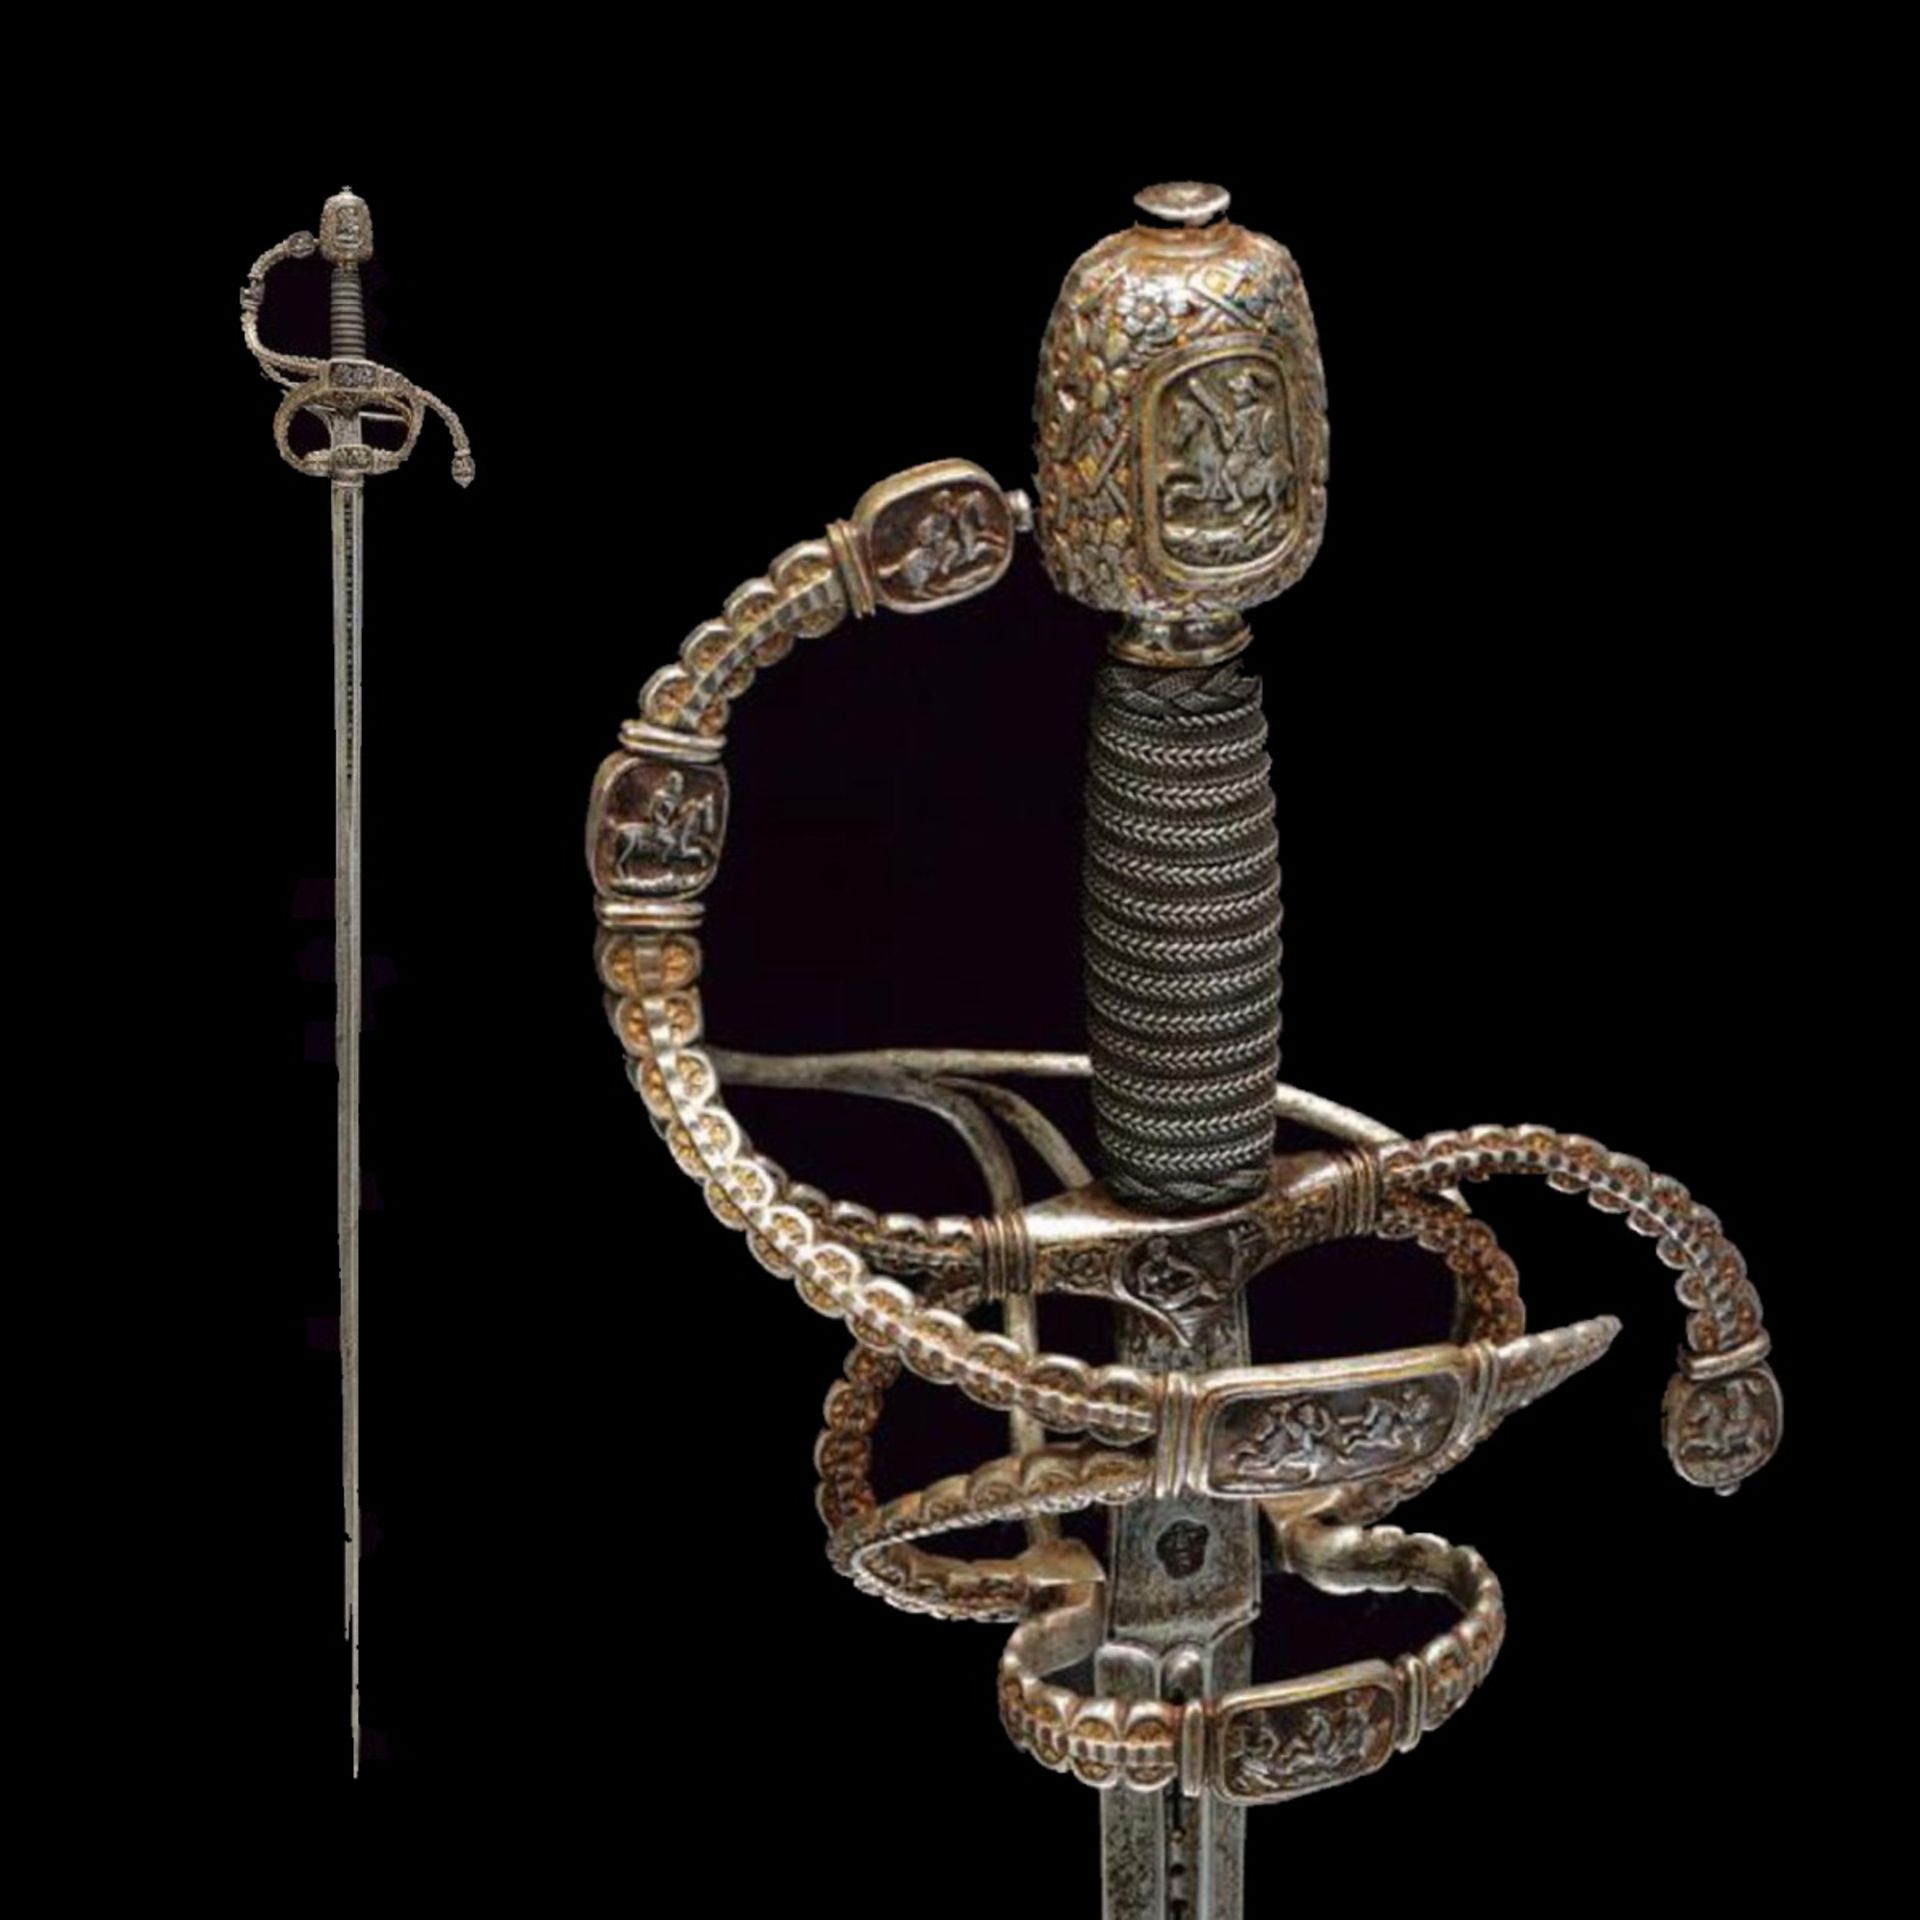 A magnificent swept hilt rapier in the style of Othmar Wetter